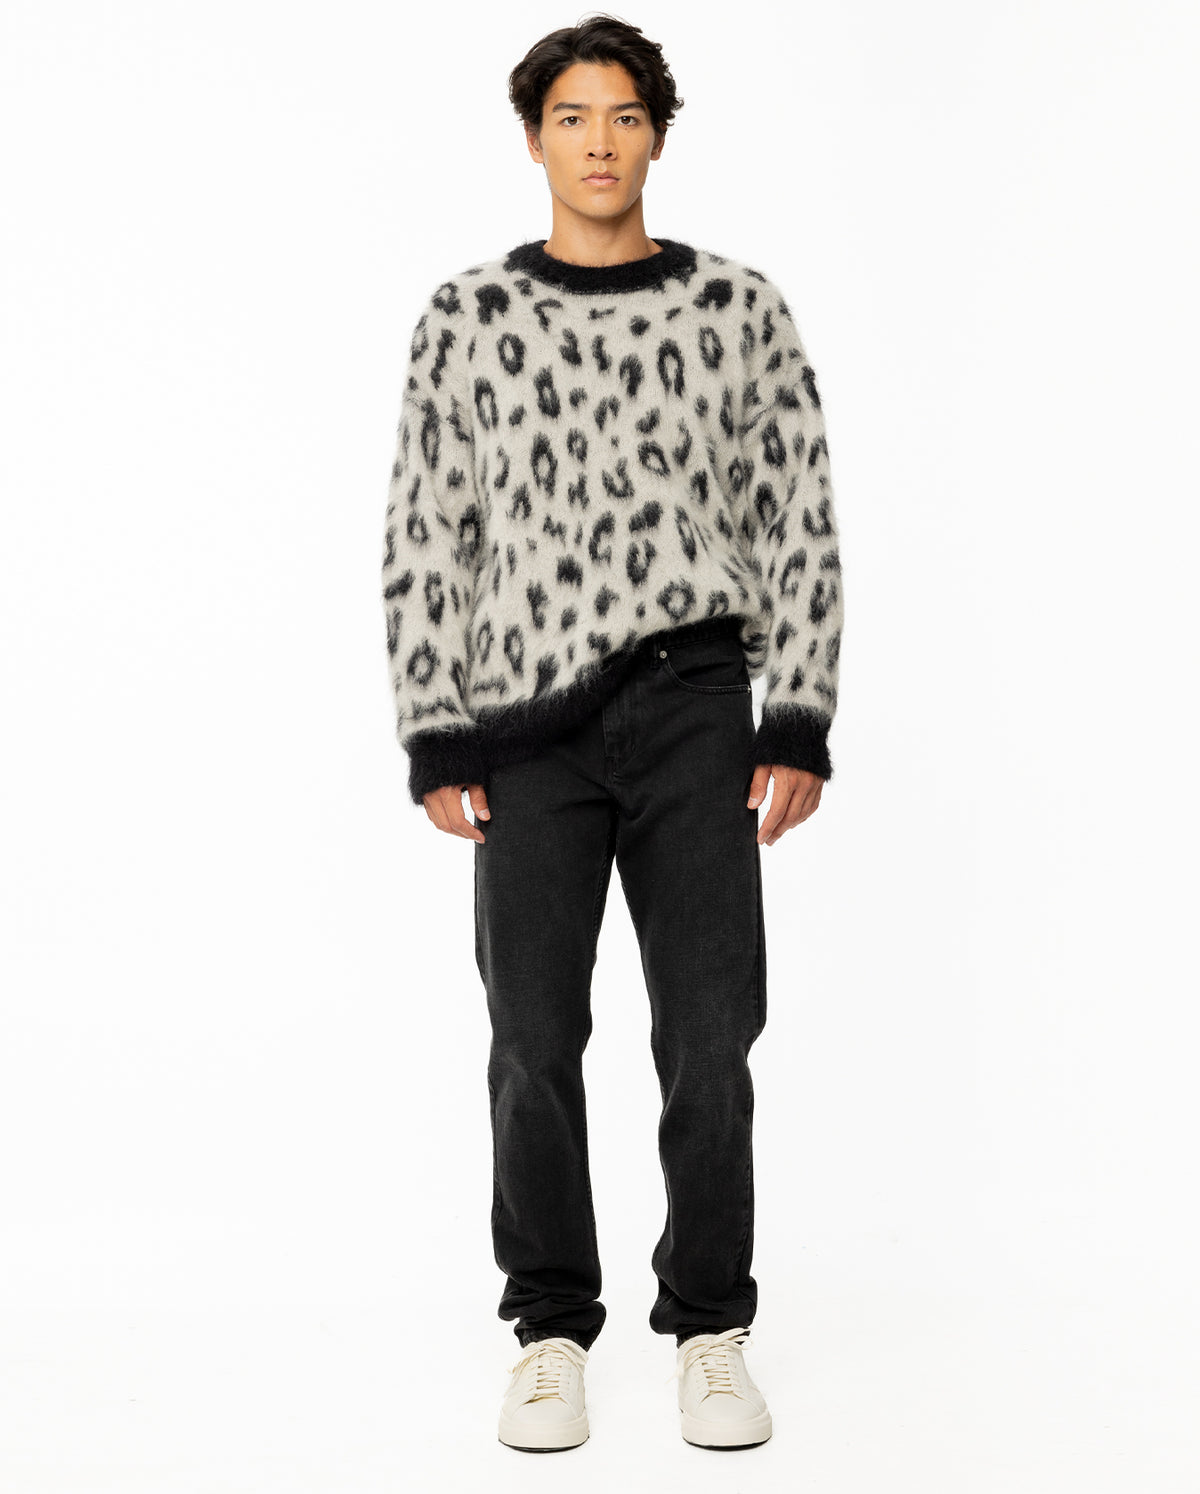 Tevy Wild Brushed Mohair Crew Sweater - Black